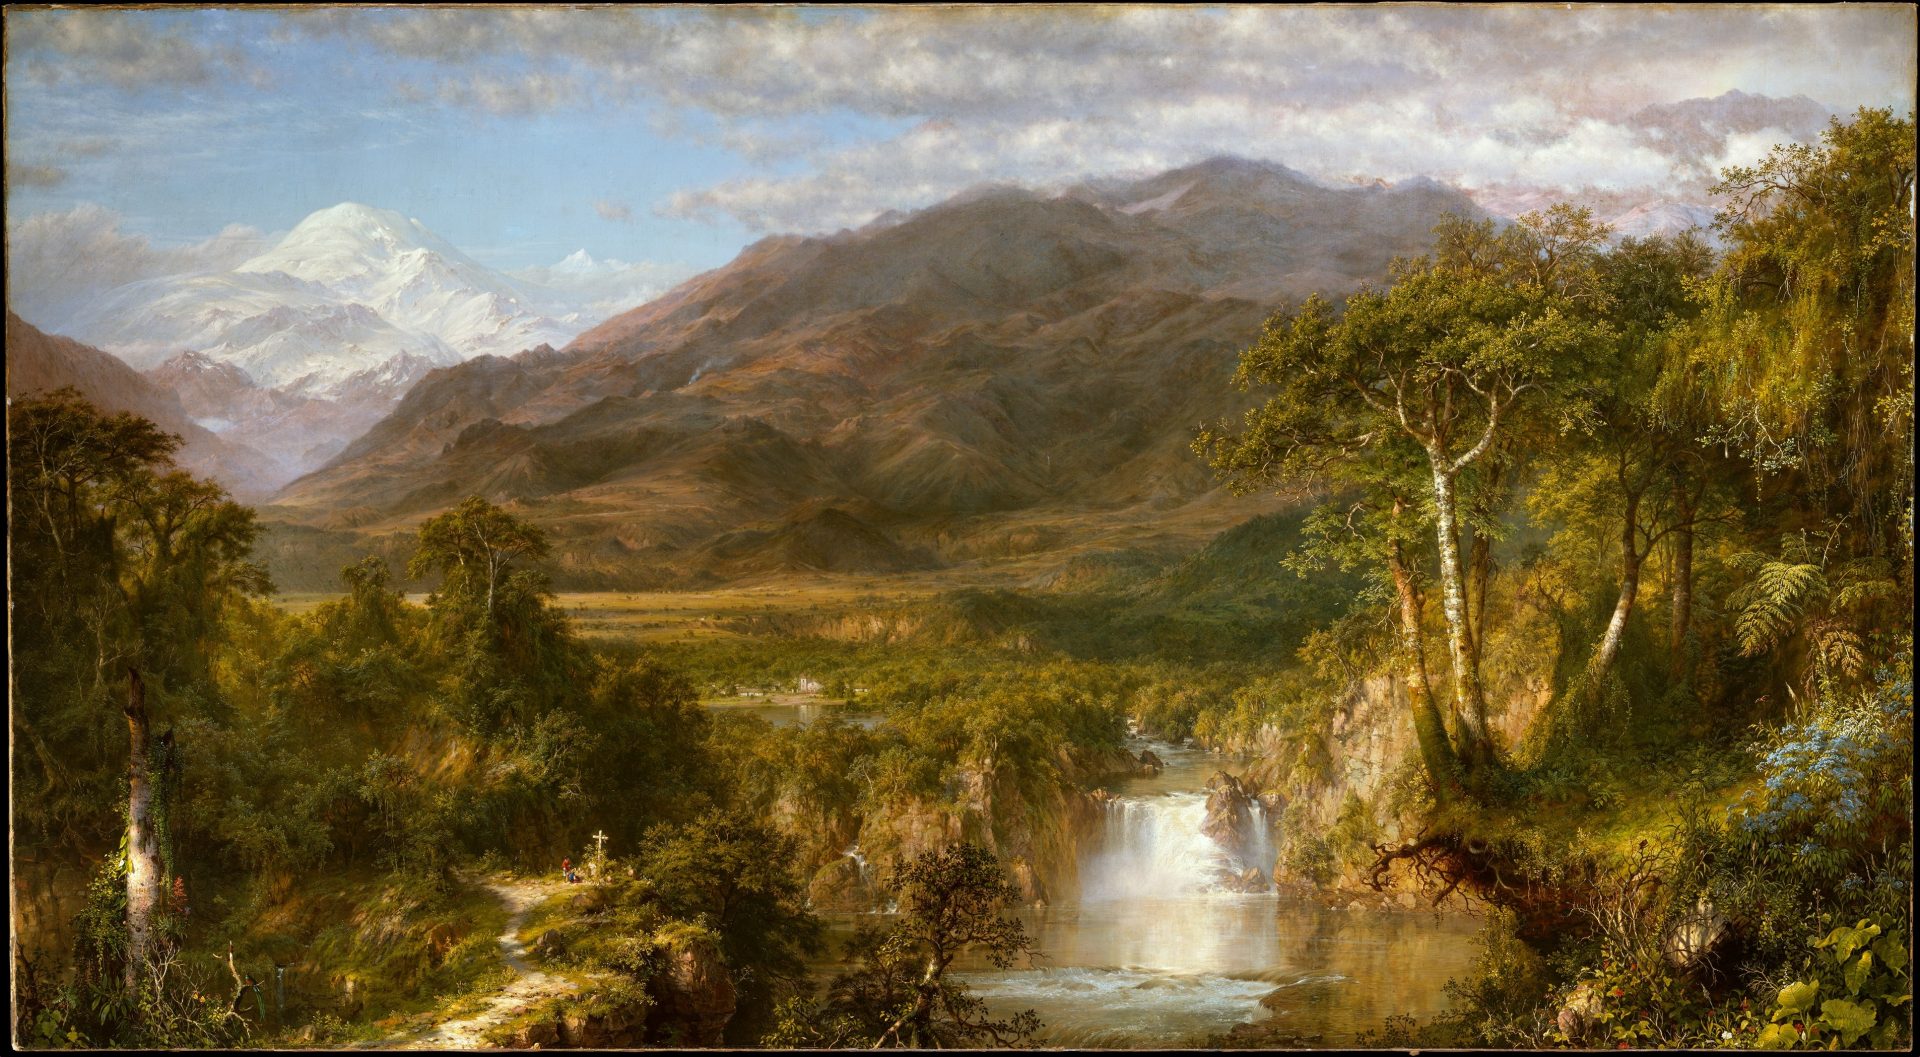 This is a vividly detailed painting of a rich, diverse South American landscape, with a waterfall feeding into a shimmering pool in the foreground. Sloping hills descend towards the distant, snow-capped Mount Chimborazo. A small hamlet with a Spanish-colonial church nestles in the central plain, while two individuals contemplate a crucifix nearby. A tree in the left forefront has the artist's signature carved into its bark.